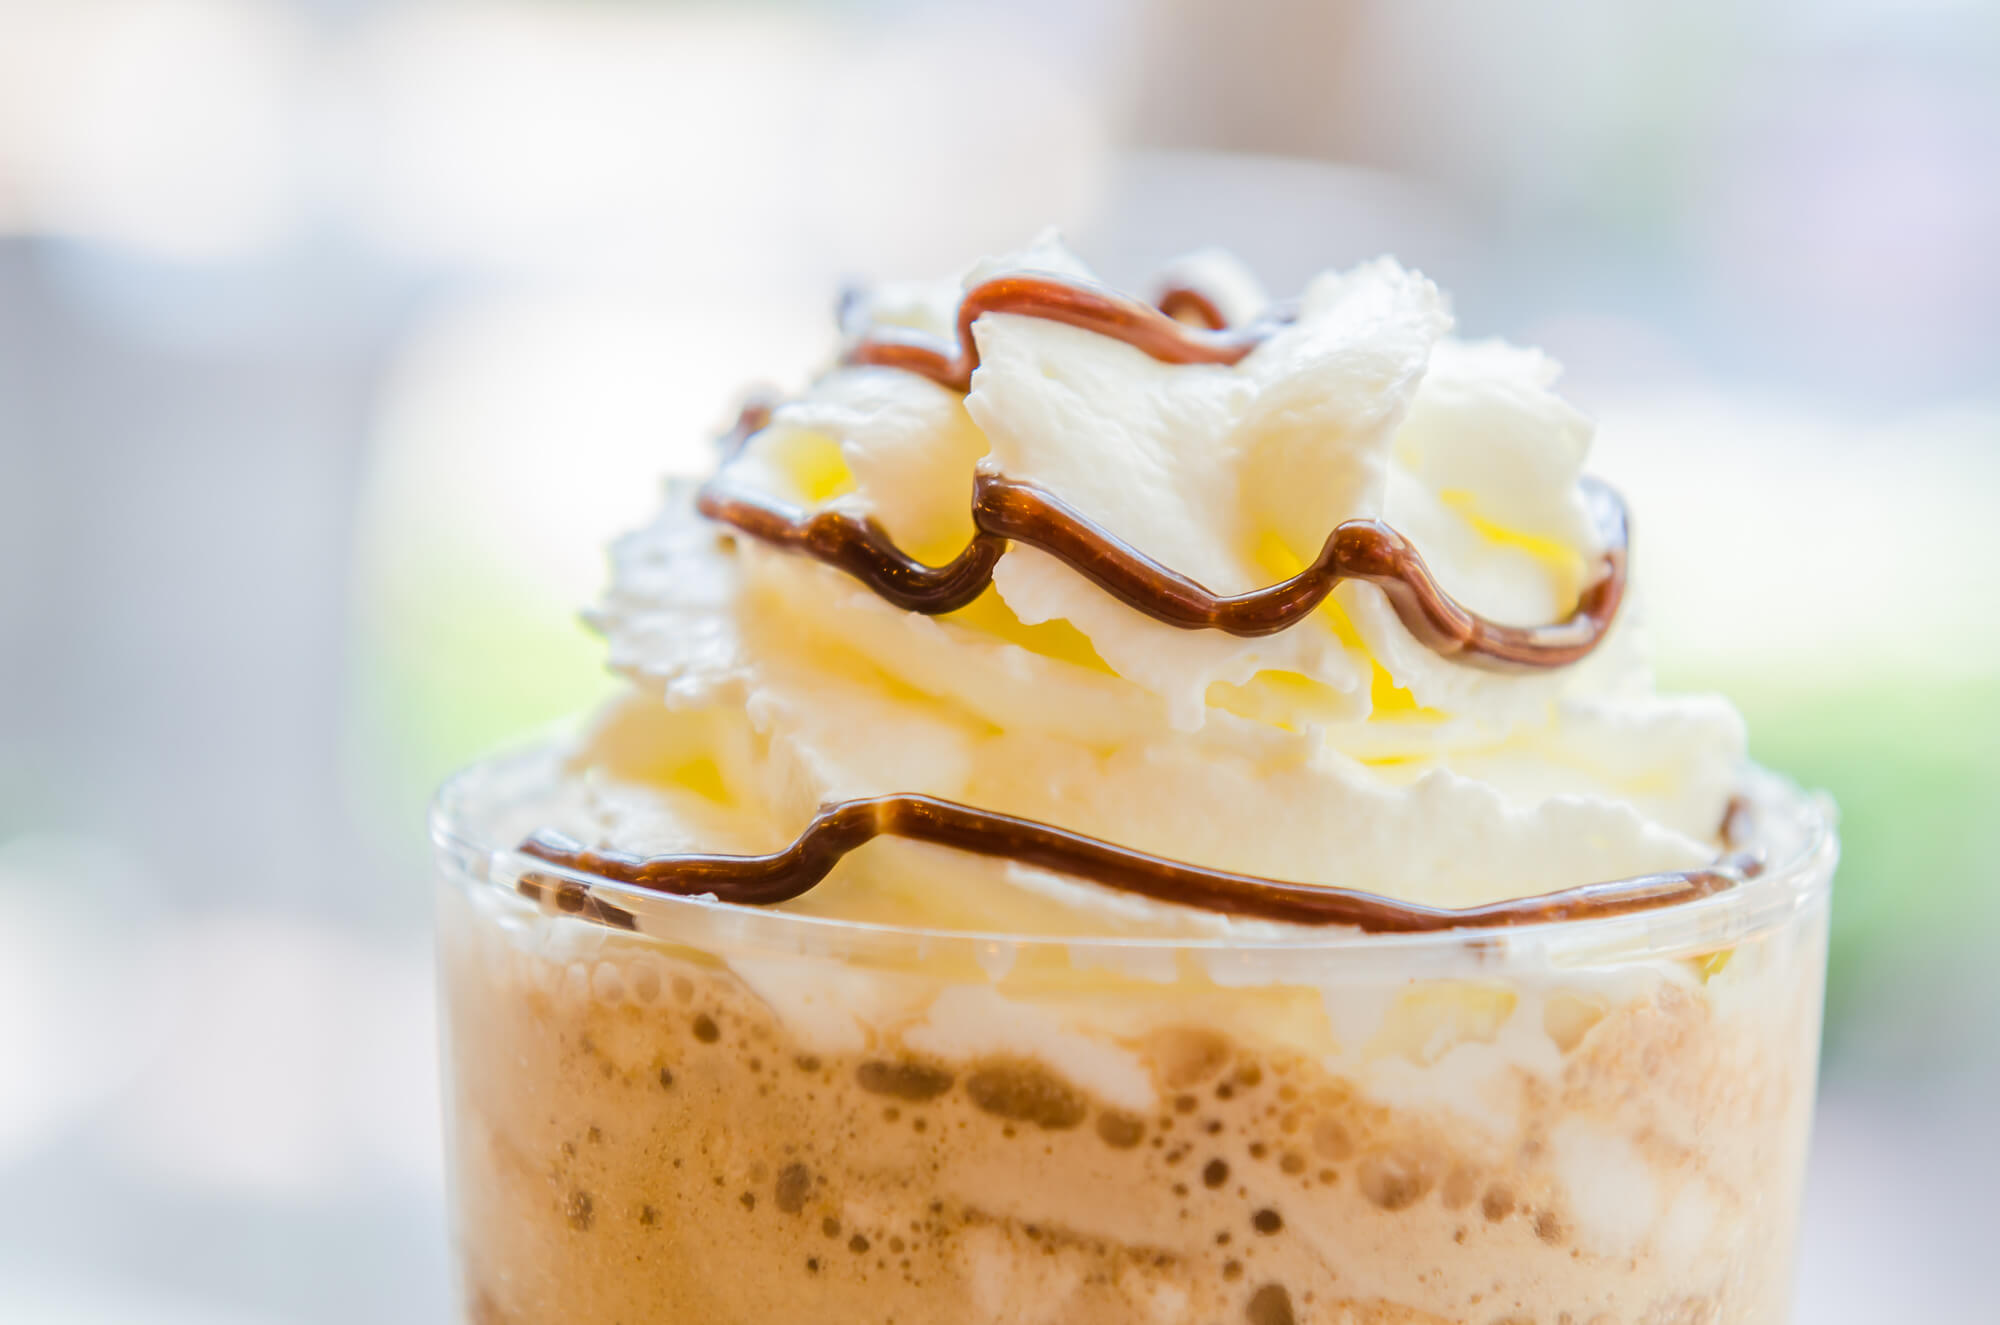 Fast-Food Face Off: Which Chain Has The Best Iced Coffee? 